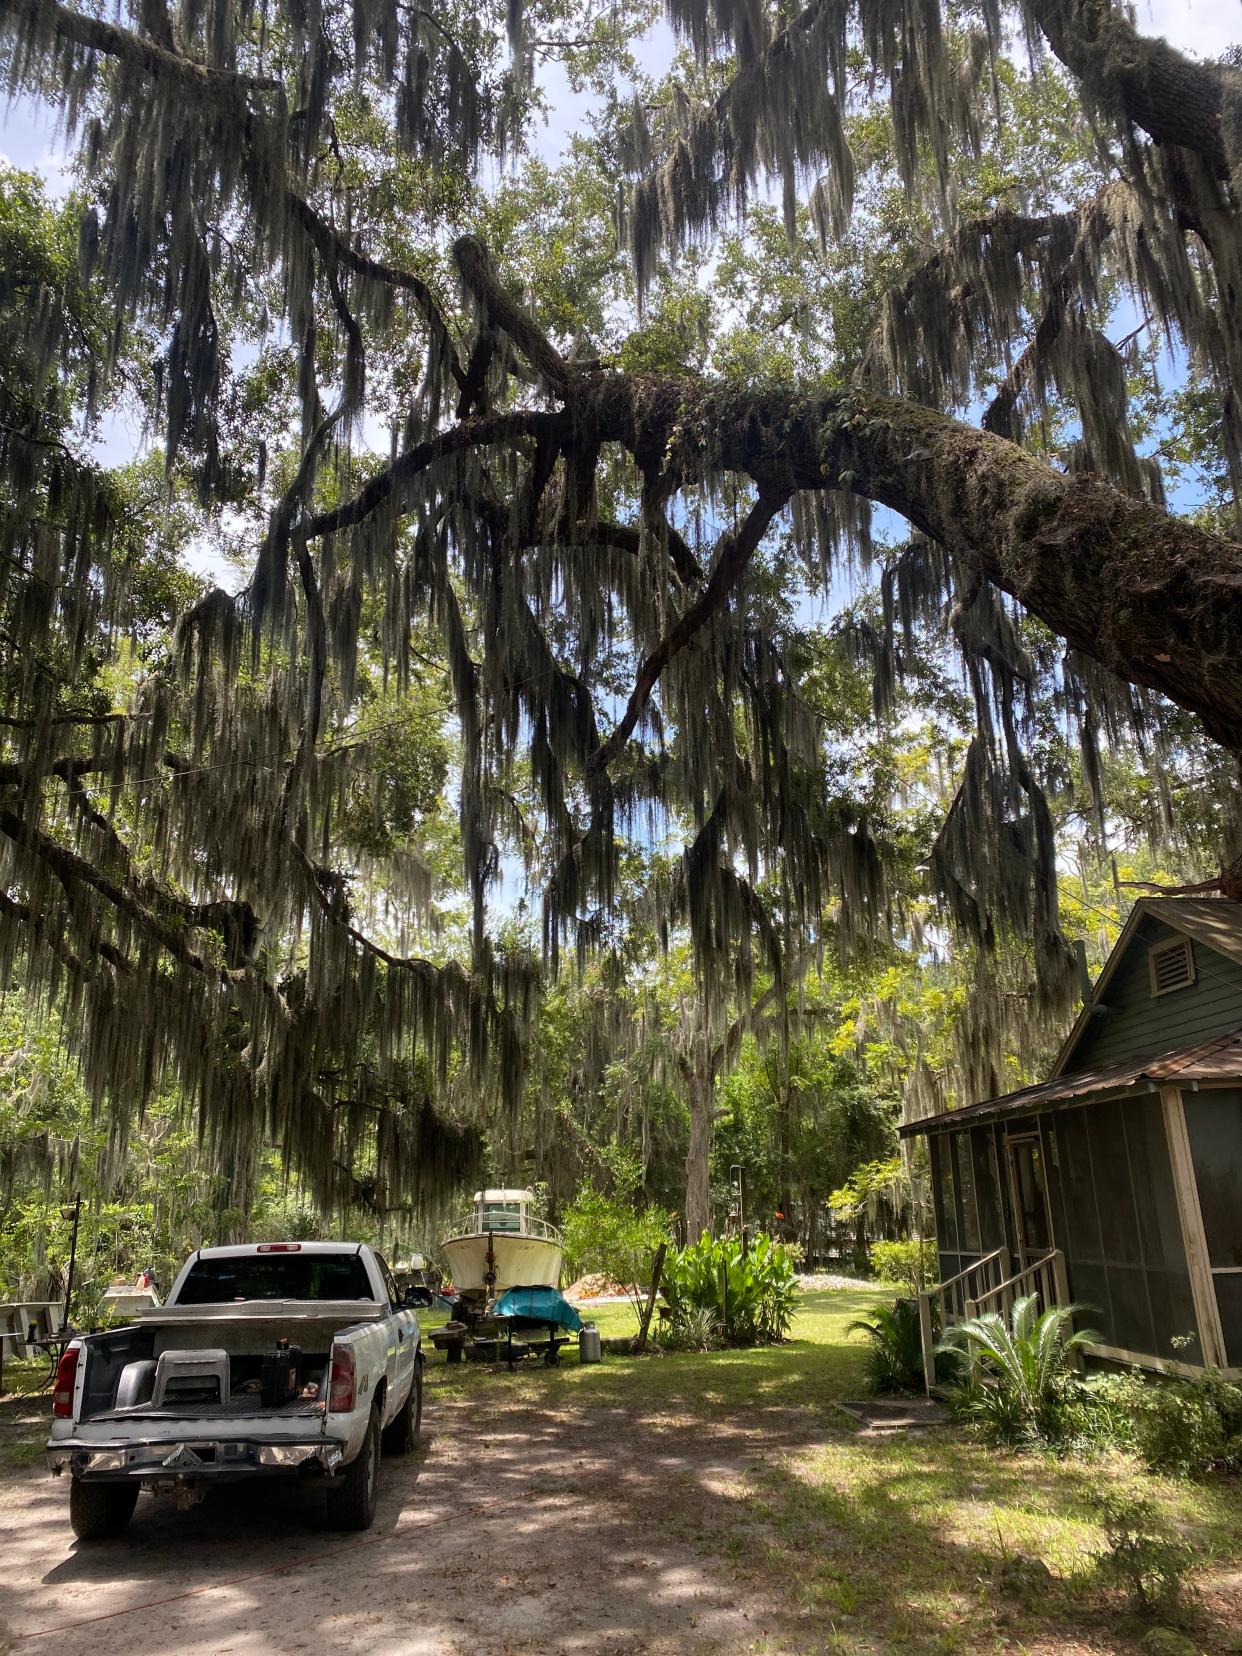 Hog Hammock is a small Black community on Sapelo Island and one of the last surviving, intact, Gullah Geechee communities in the area.